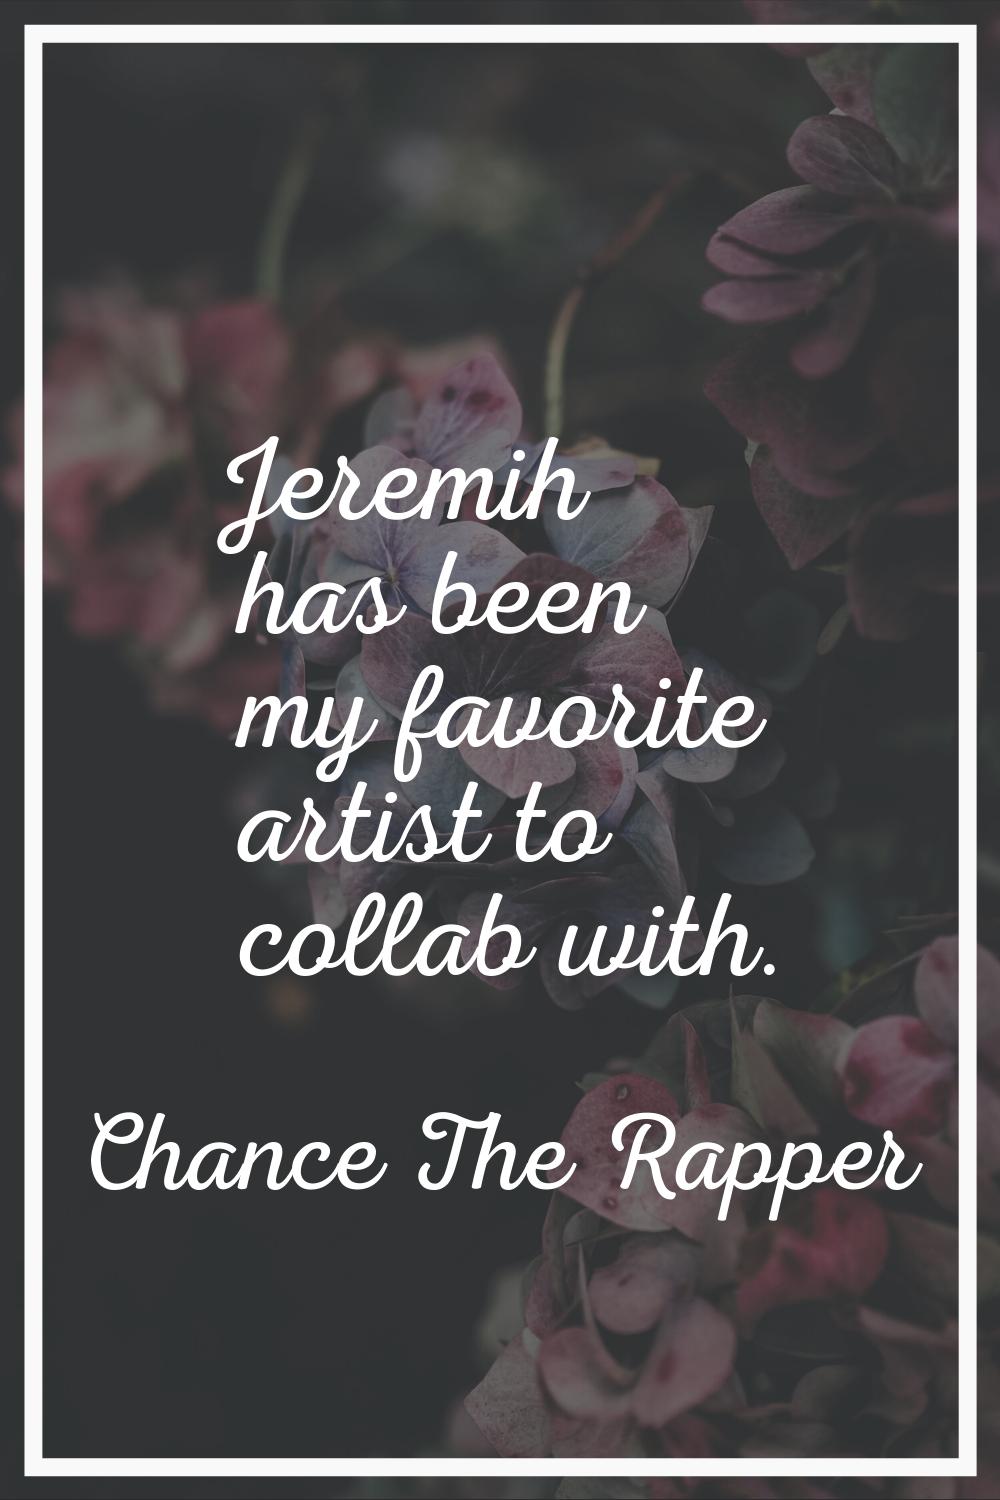 Jeremih has been my favorite artist to collab with.